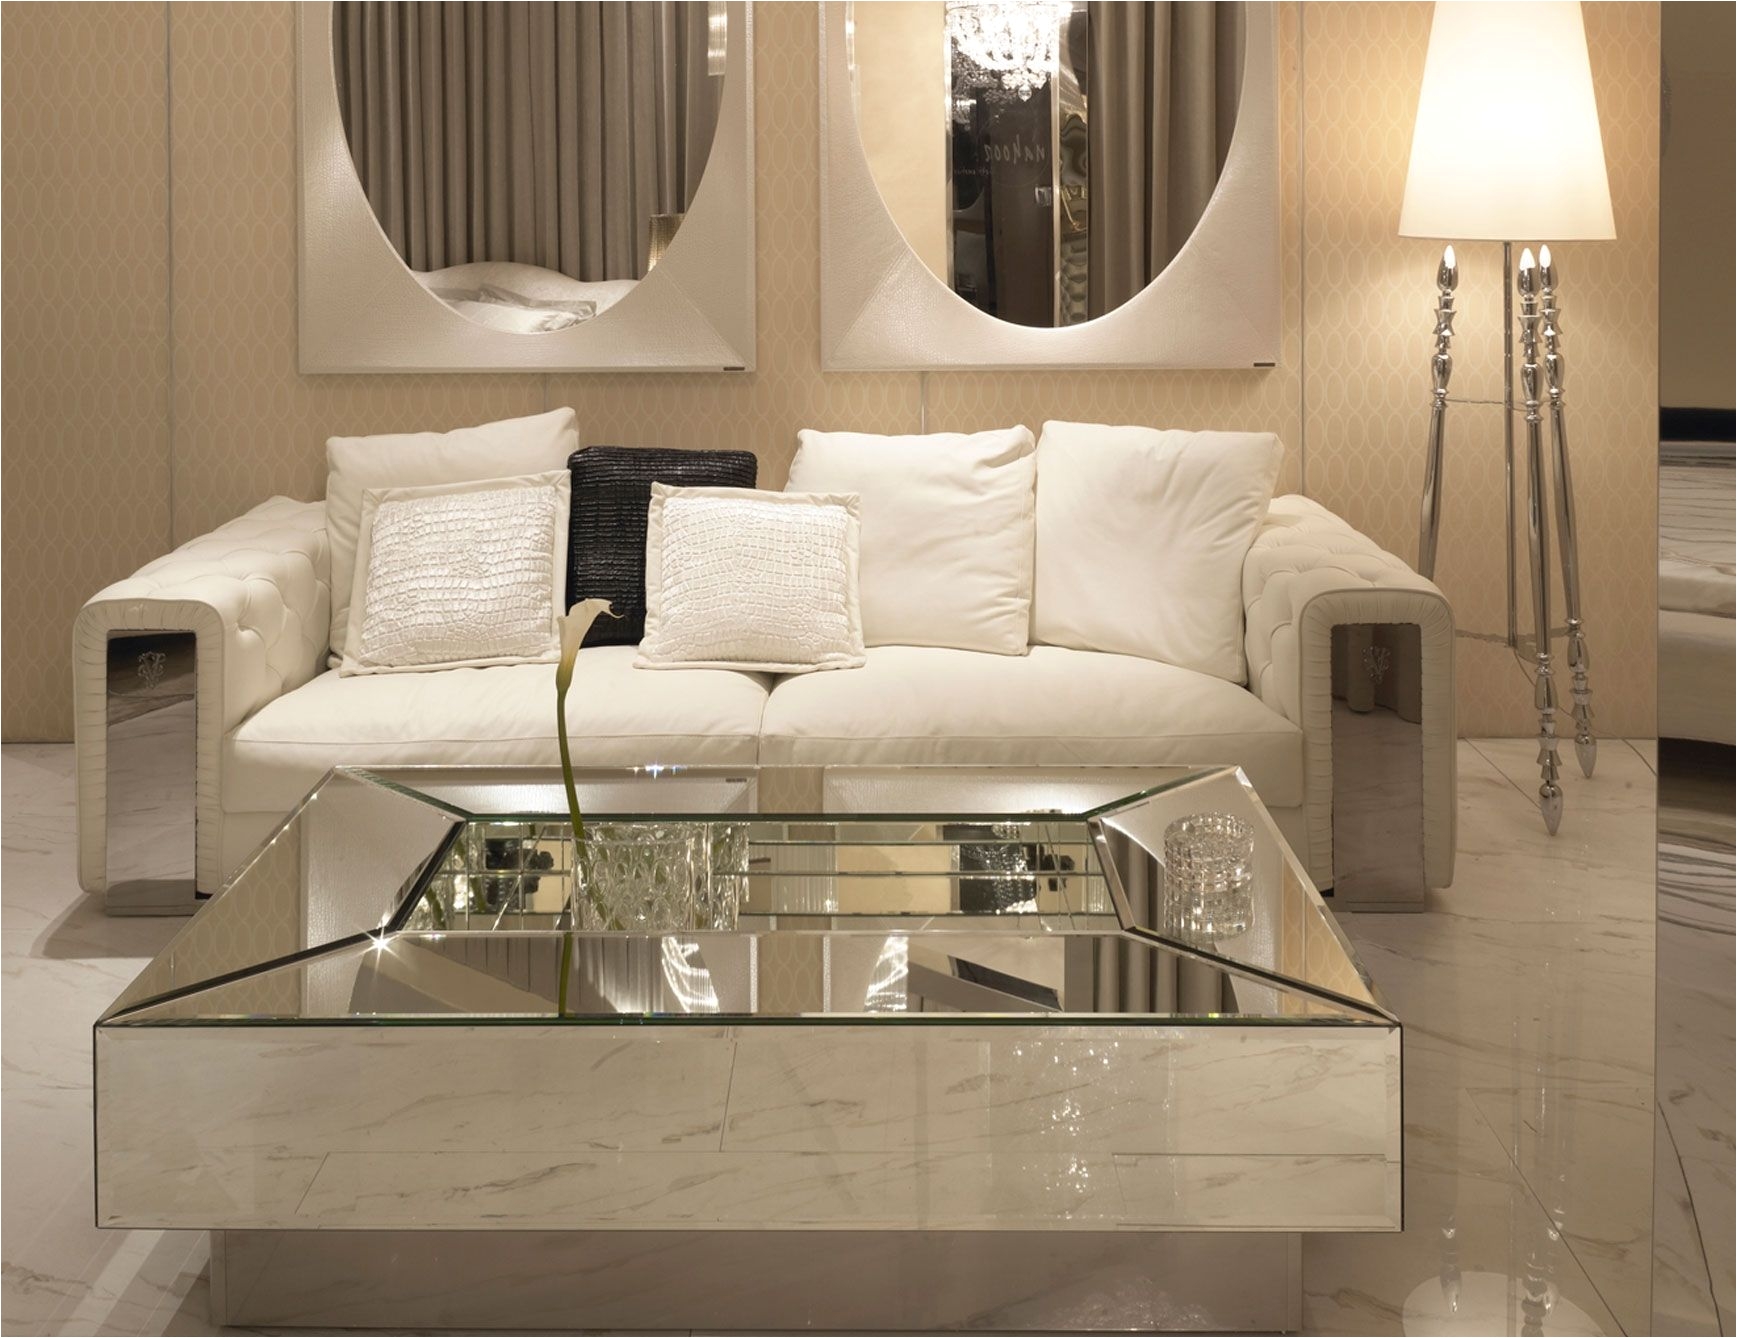 Mesmerizing Mirrored Coffee Table with Glass and Wood bined Furniture Modern Minimalist Living Room Design White Marble Floor Square Glass Top Mirrored